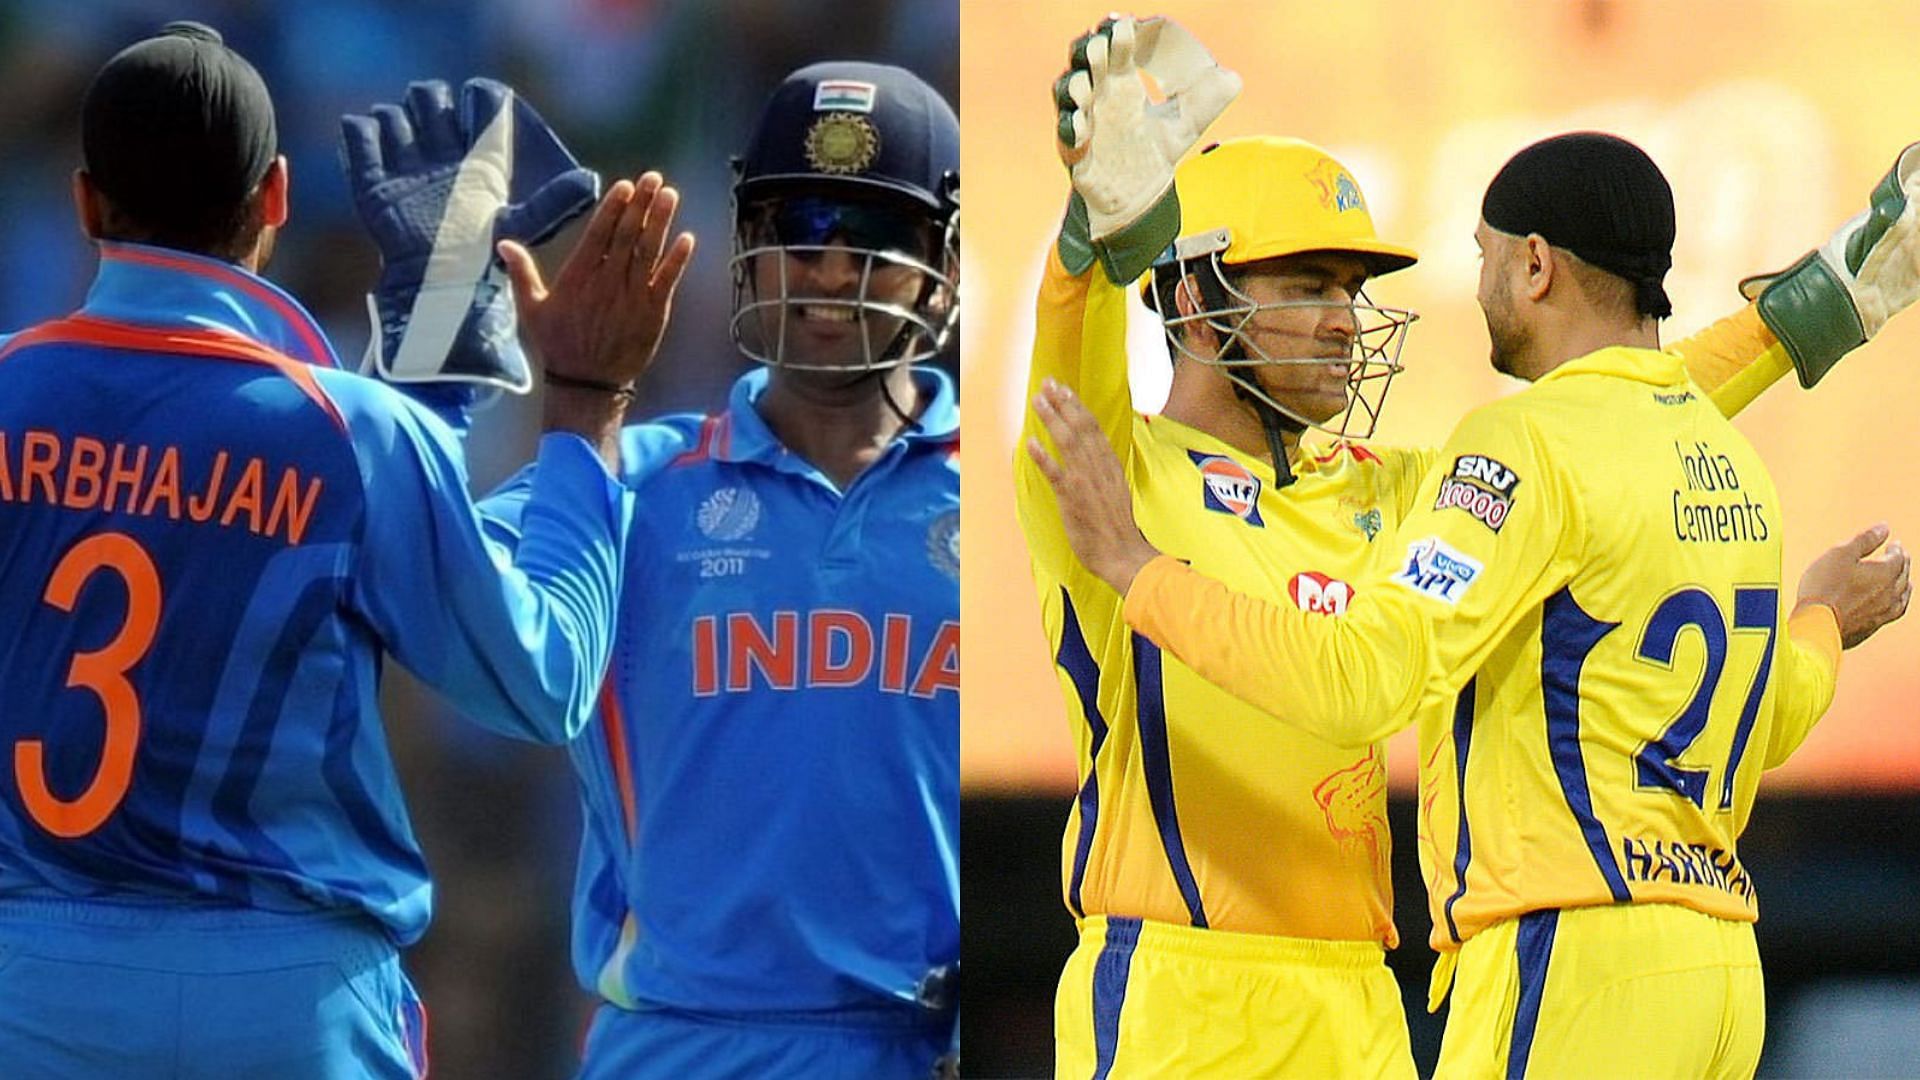 Harbhajan has opened up about his relationship with former India skipper Dhoni